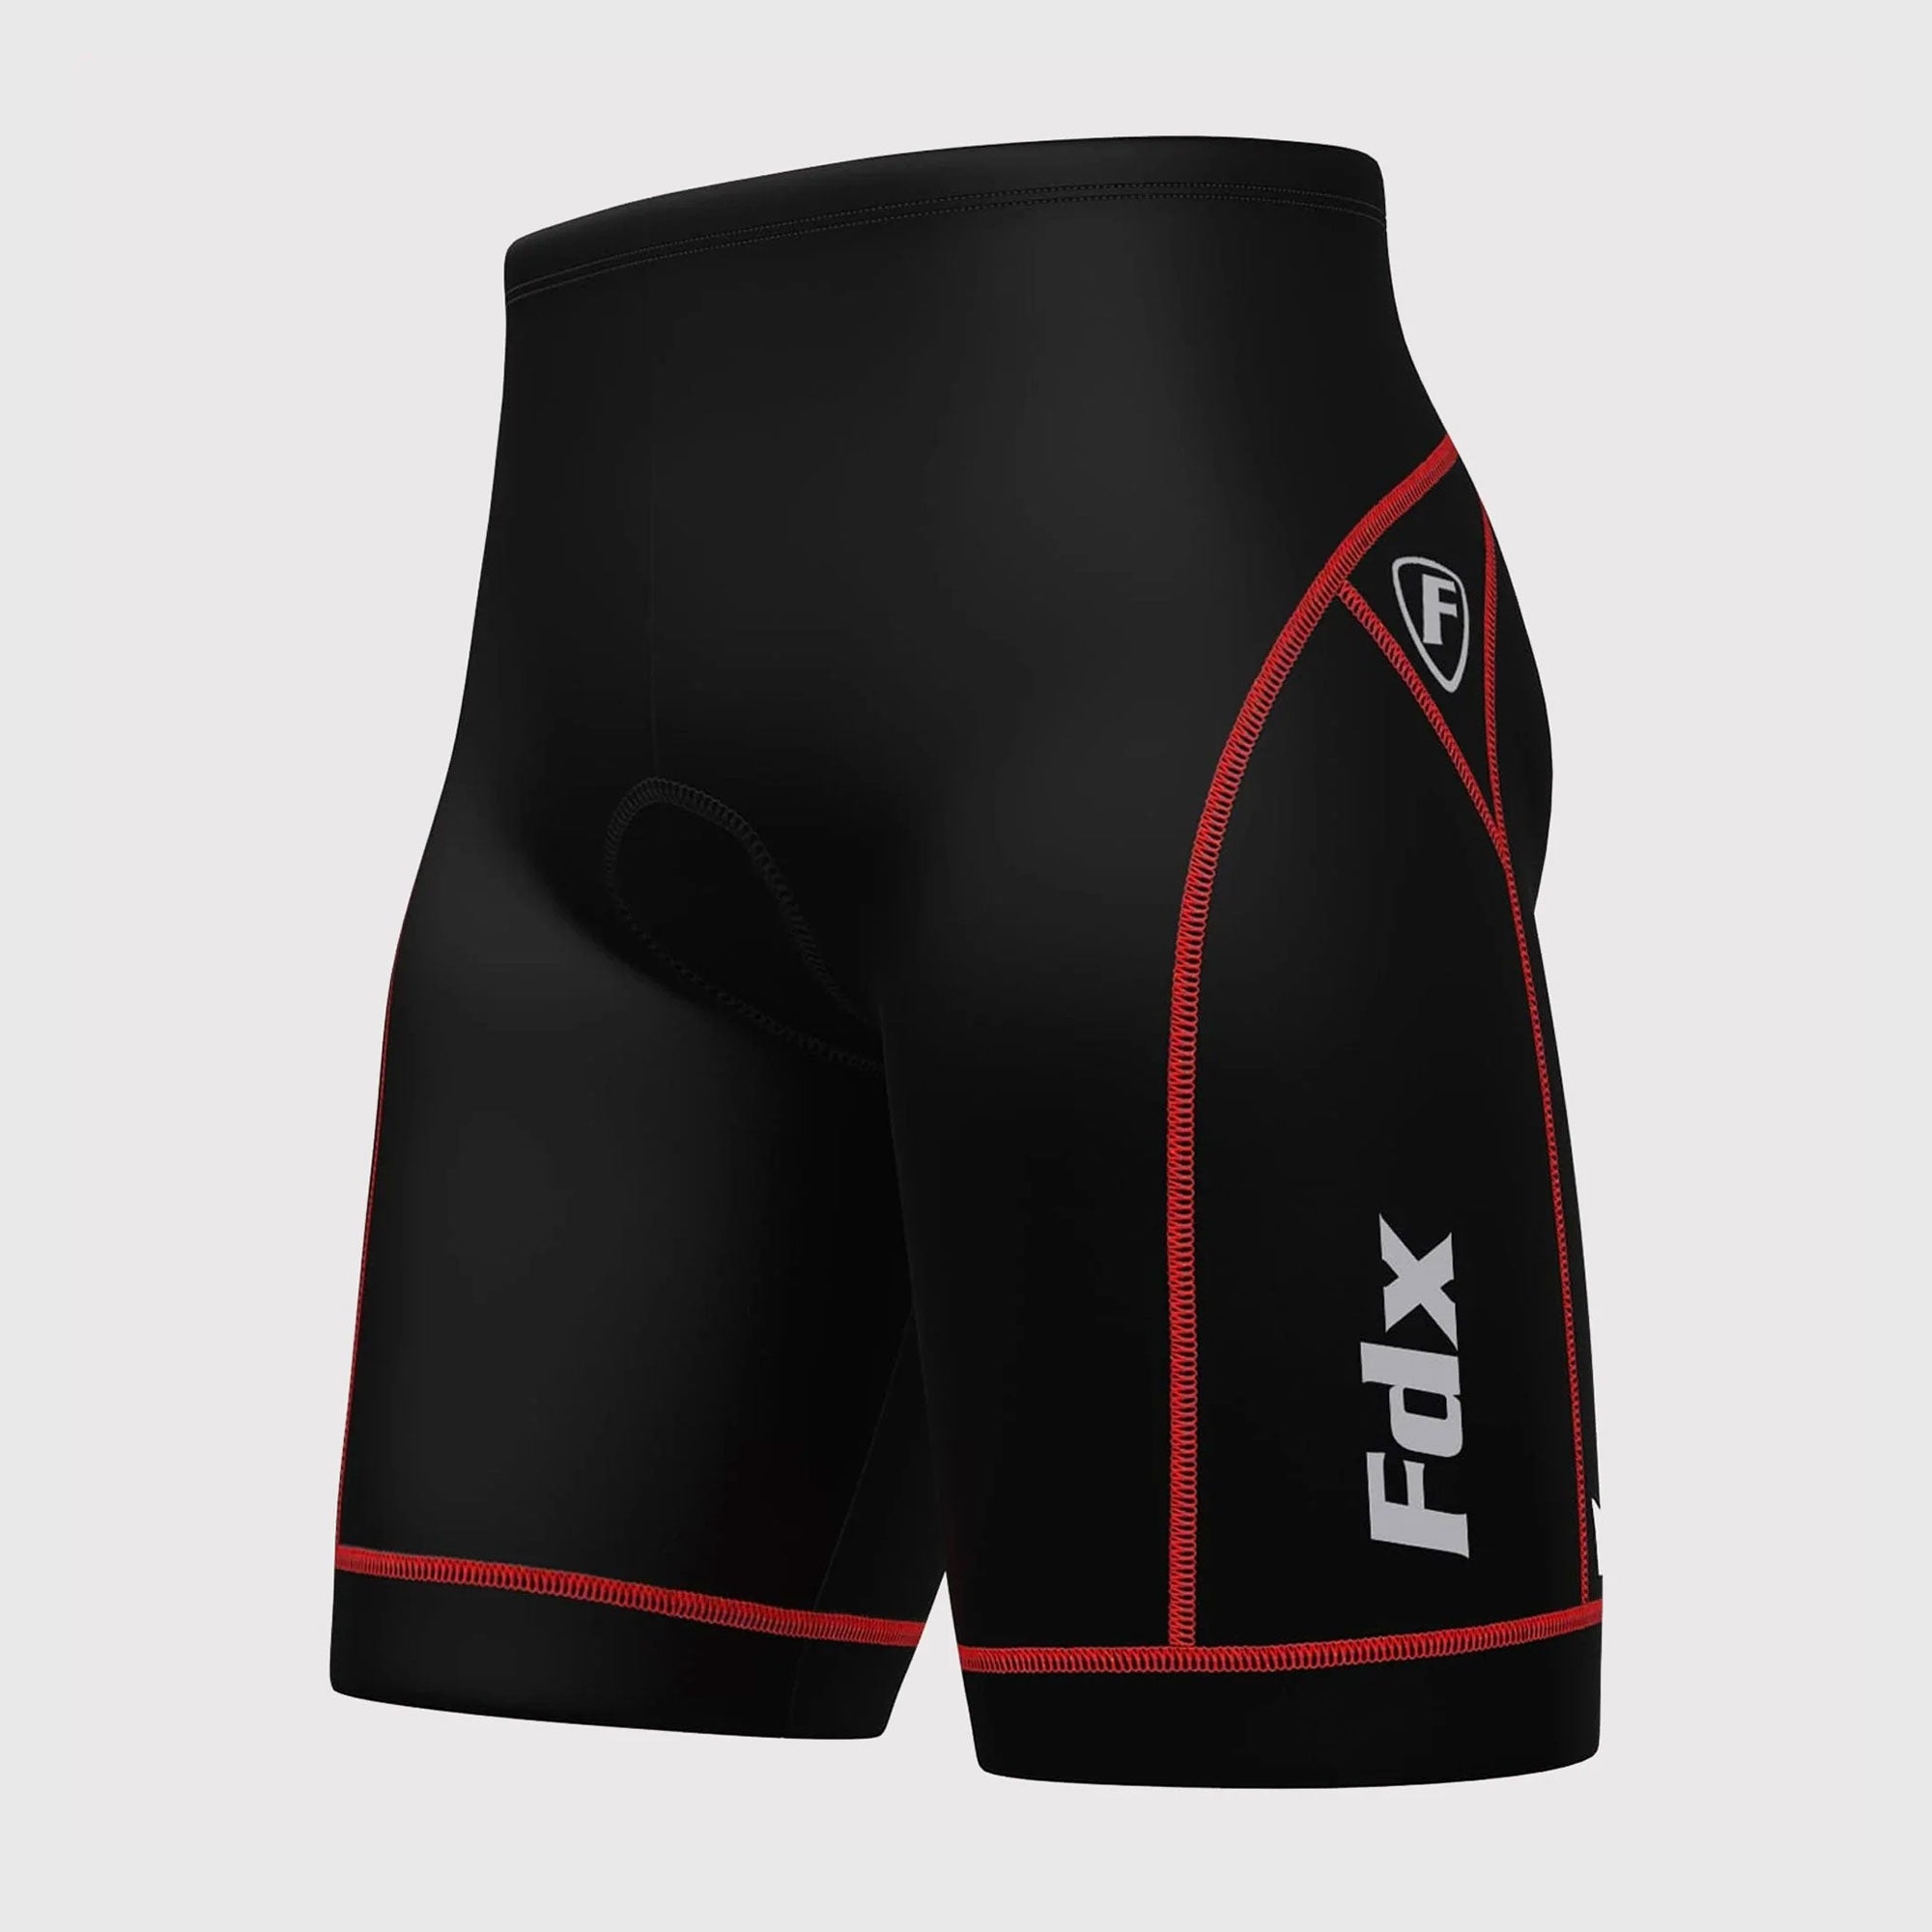 Fdx Ridest Red Men's Padded Summer Cycling Shorts